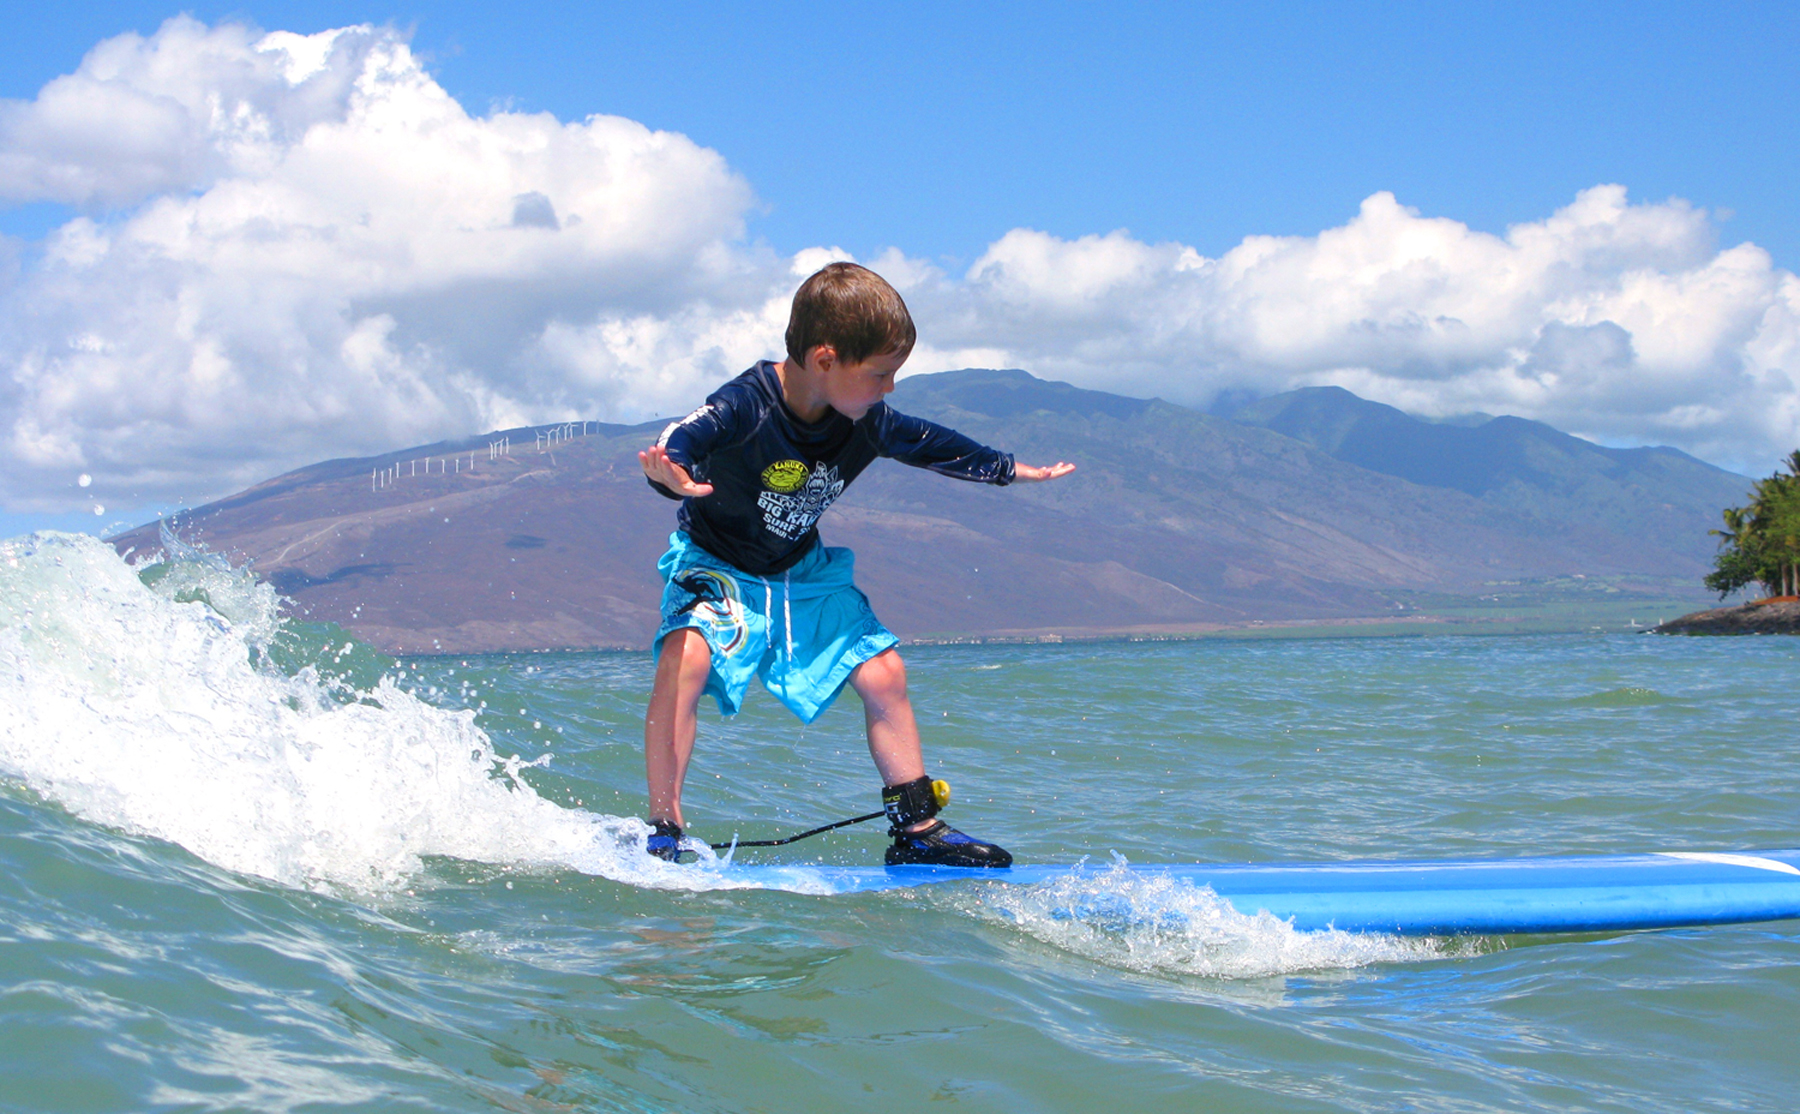 Six-year-old Ryan, who has leukemia, rides a surf board on his wish trip in Hawaii. Seventy-five percent of the wishes Make-A-WIsh grants involve travel making airline miles a critical resource.